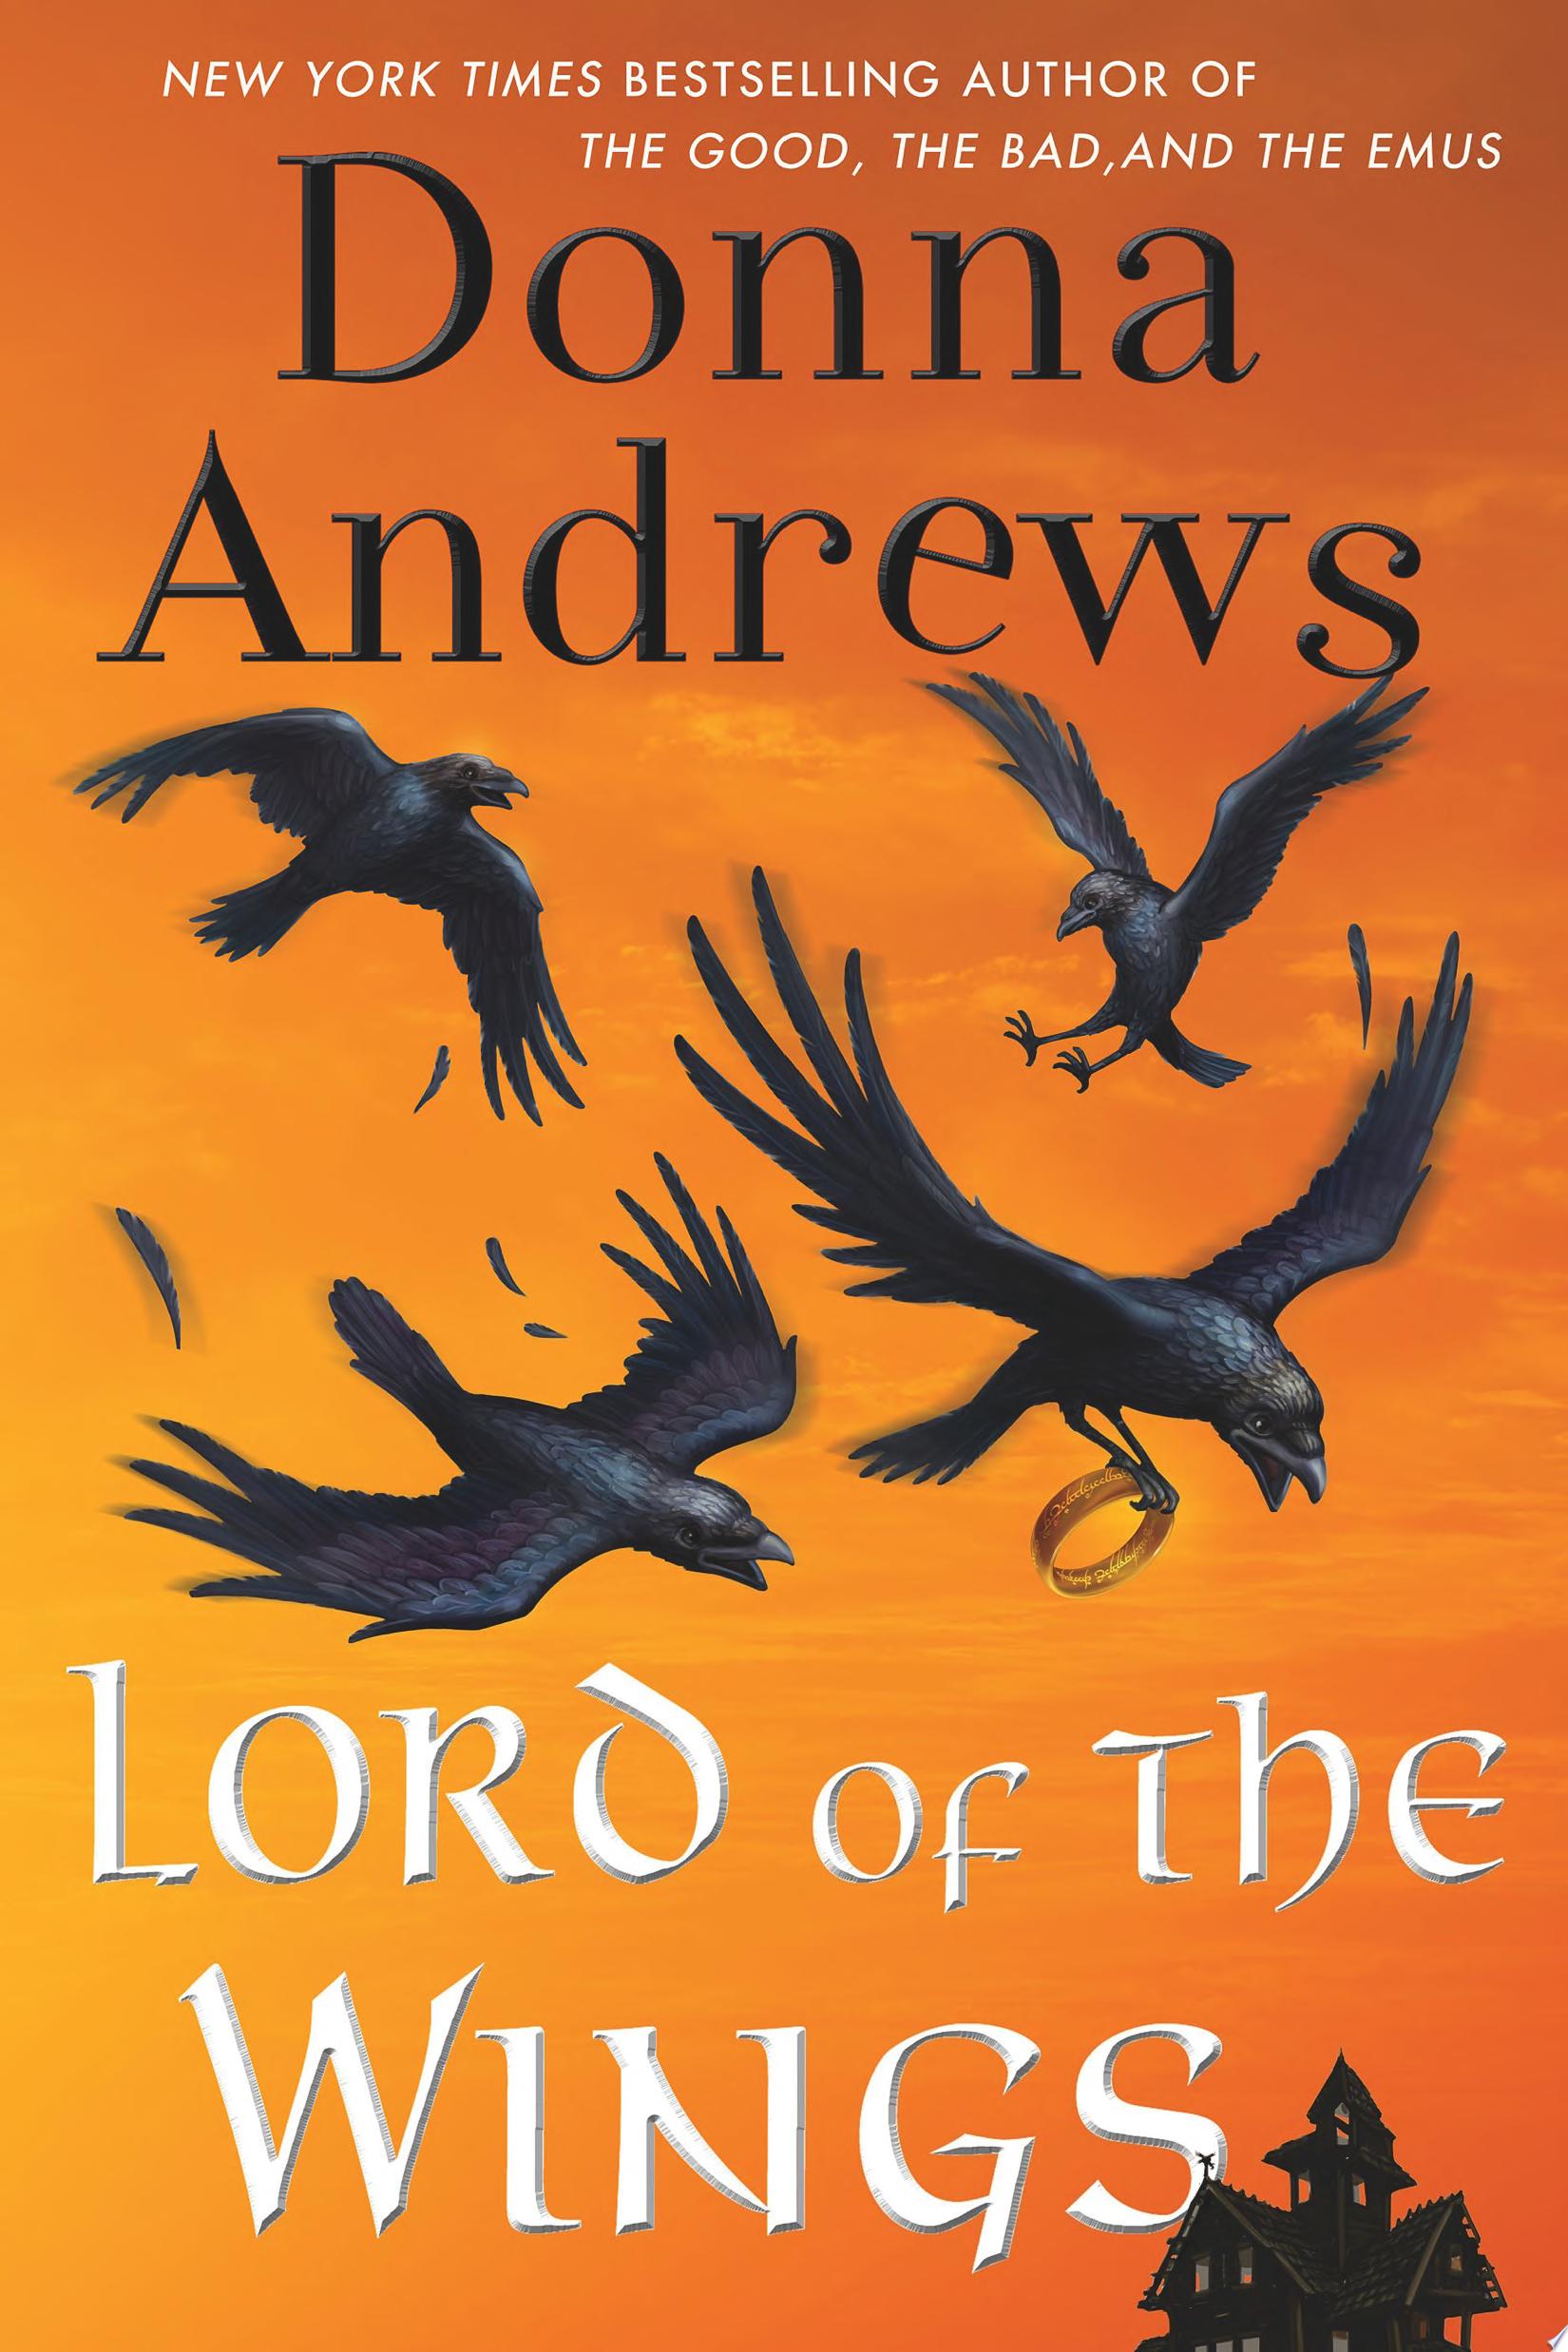 Image for "Lord of the Wings"